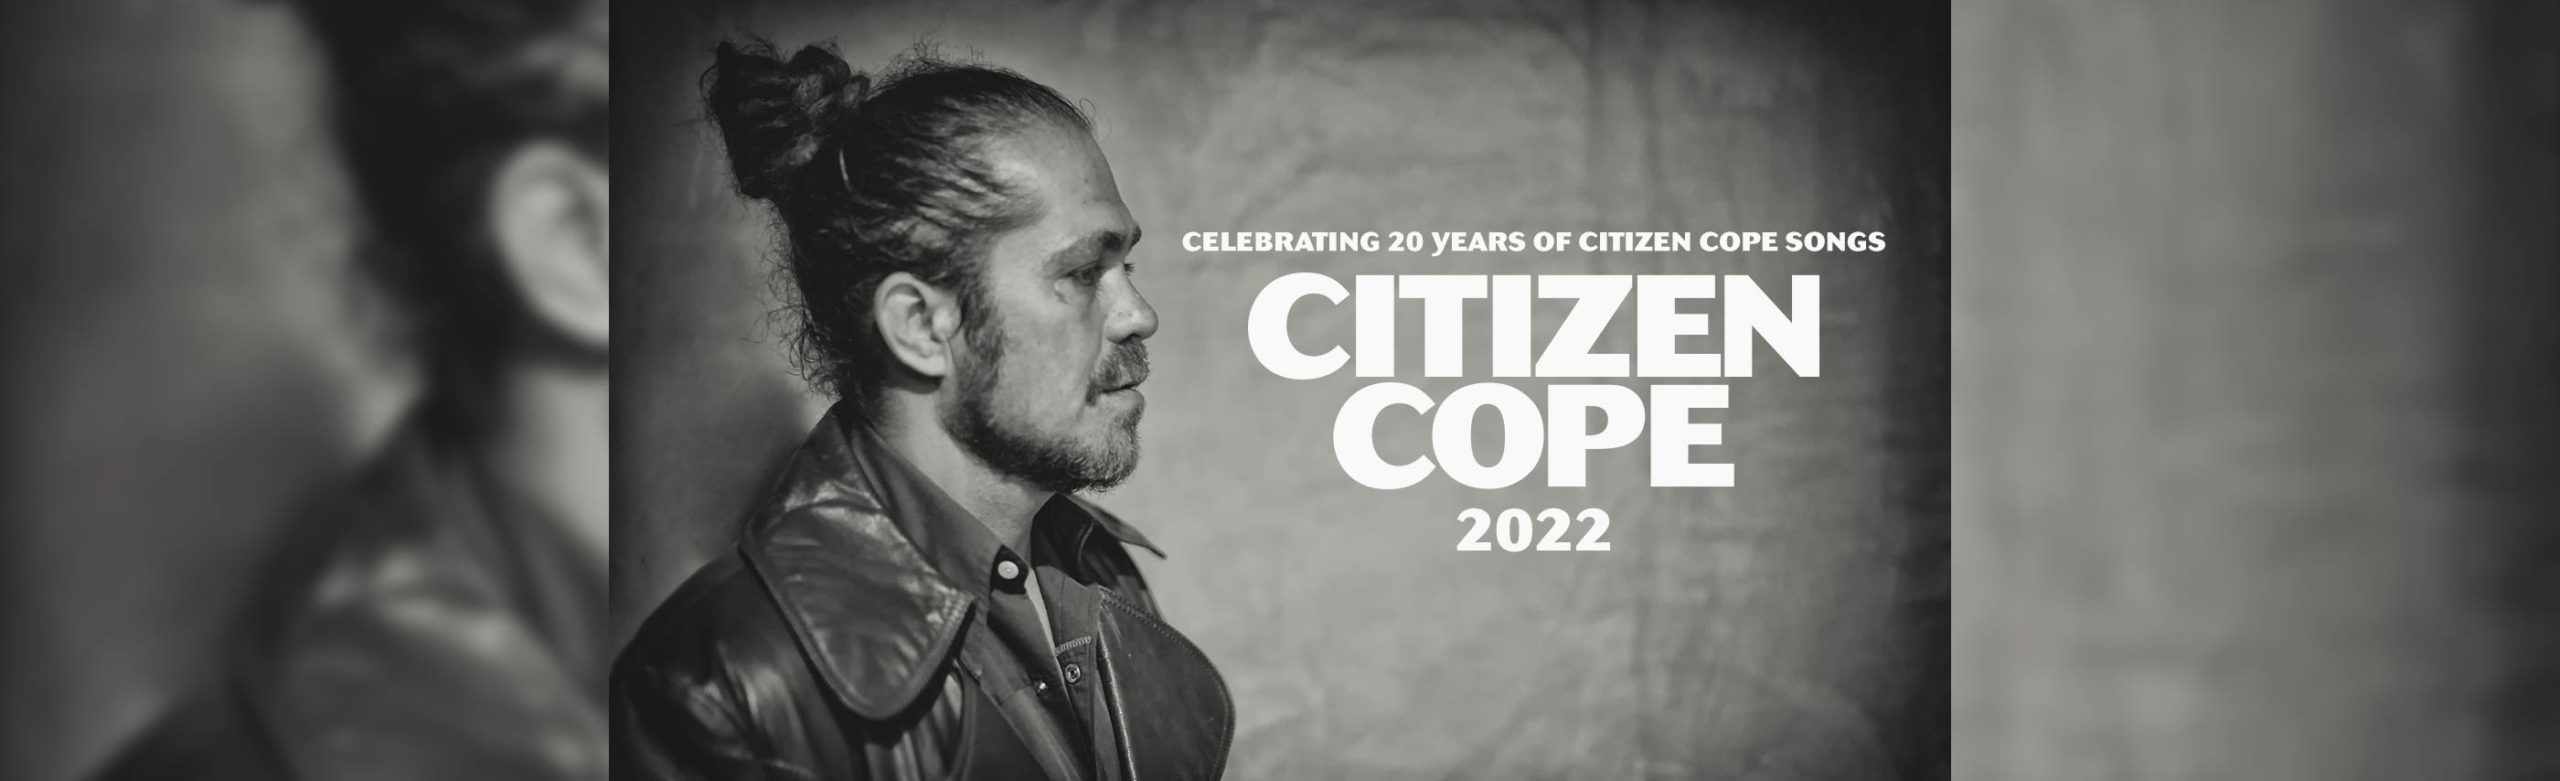 Event Info: Citizen Cope at The Wilma 2022 Image